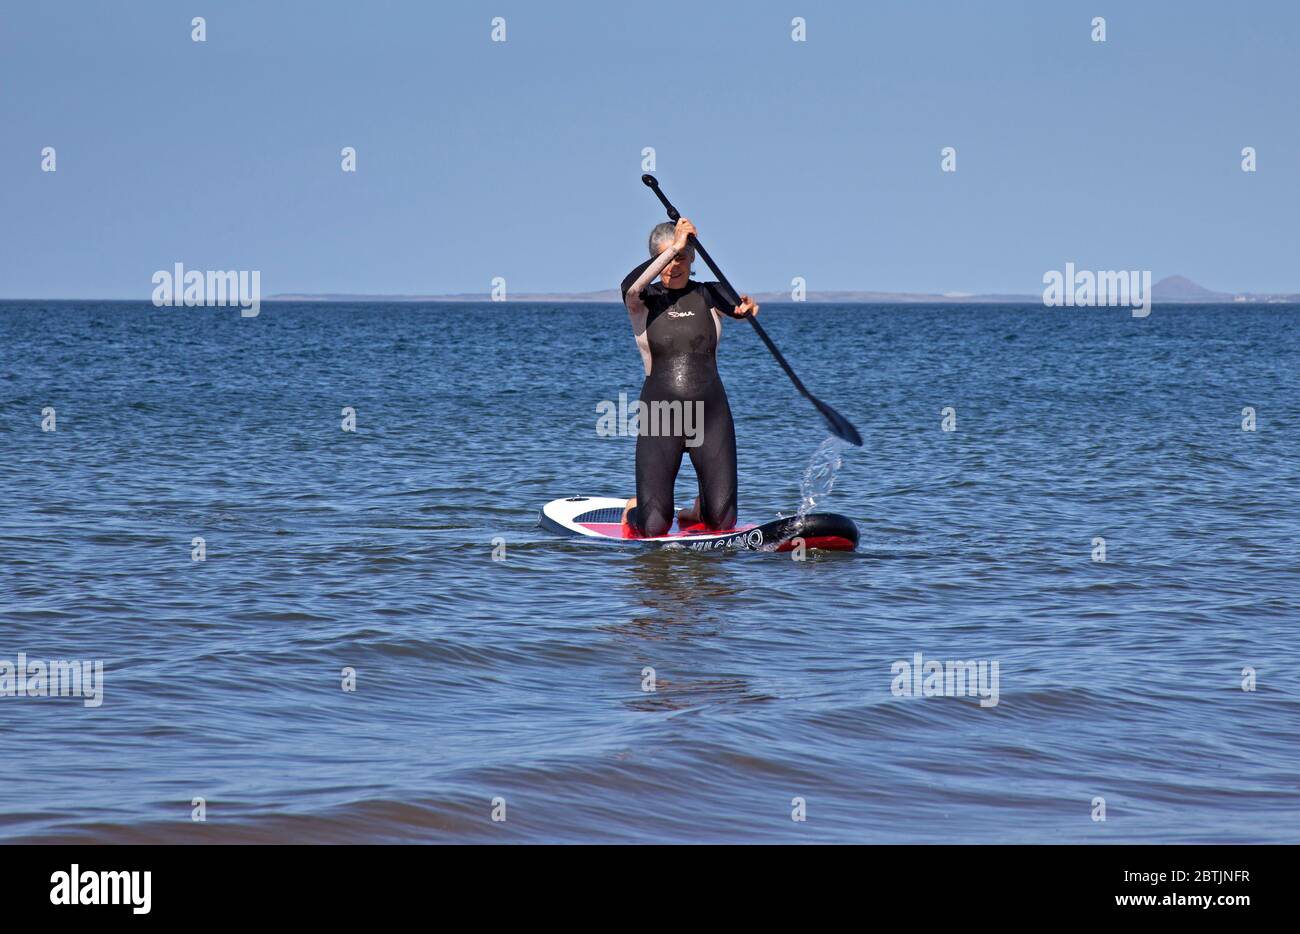 Portobello, Edinburgh, Scotland, UK. 26 May 2020. More relaxed atmosphere at the seaside late afternoon as Scotland nears the end of Phase 1 of Coronavirus Lockdown. Temperature of 19 degrees and sunny. Pictured the Harrison family, mum enjoys kneeling  on her stand up paddle board. Stock Photo